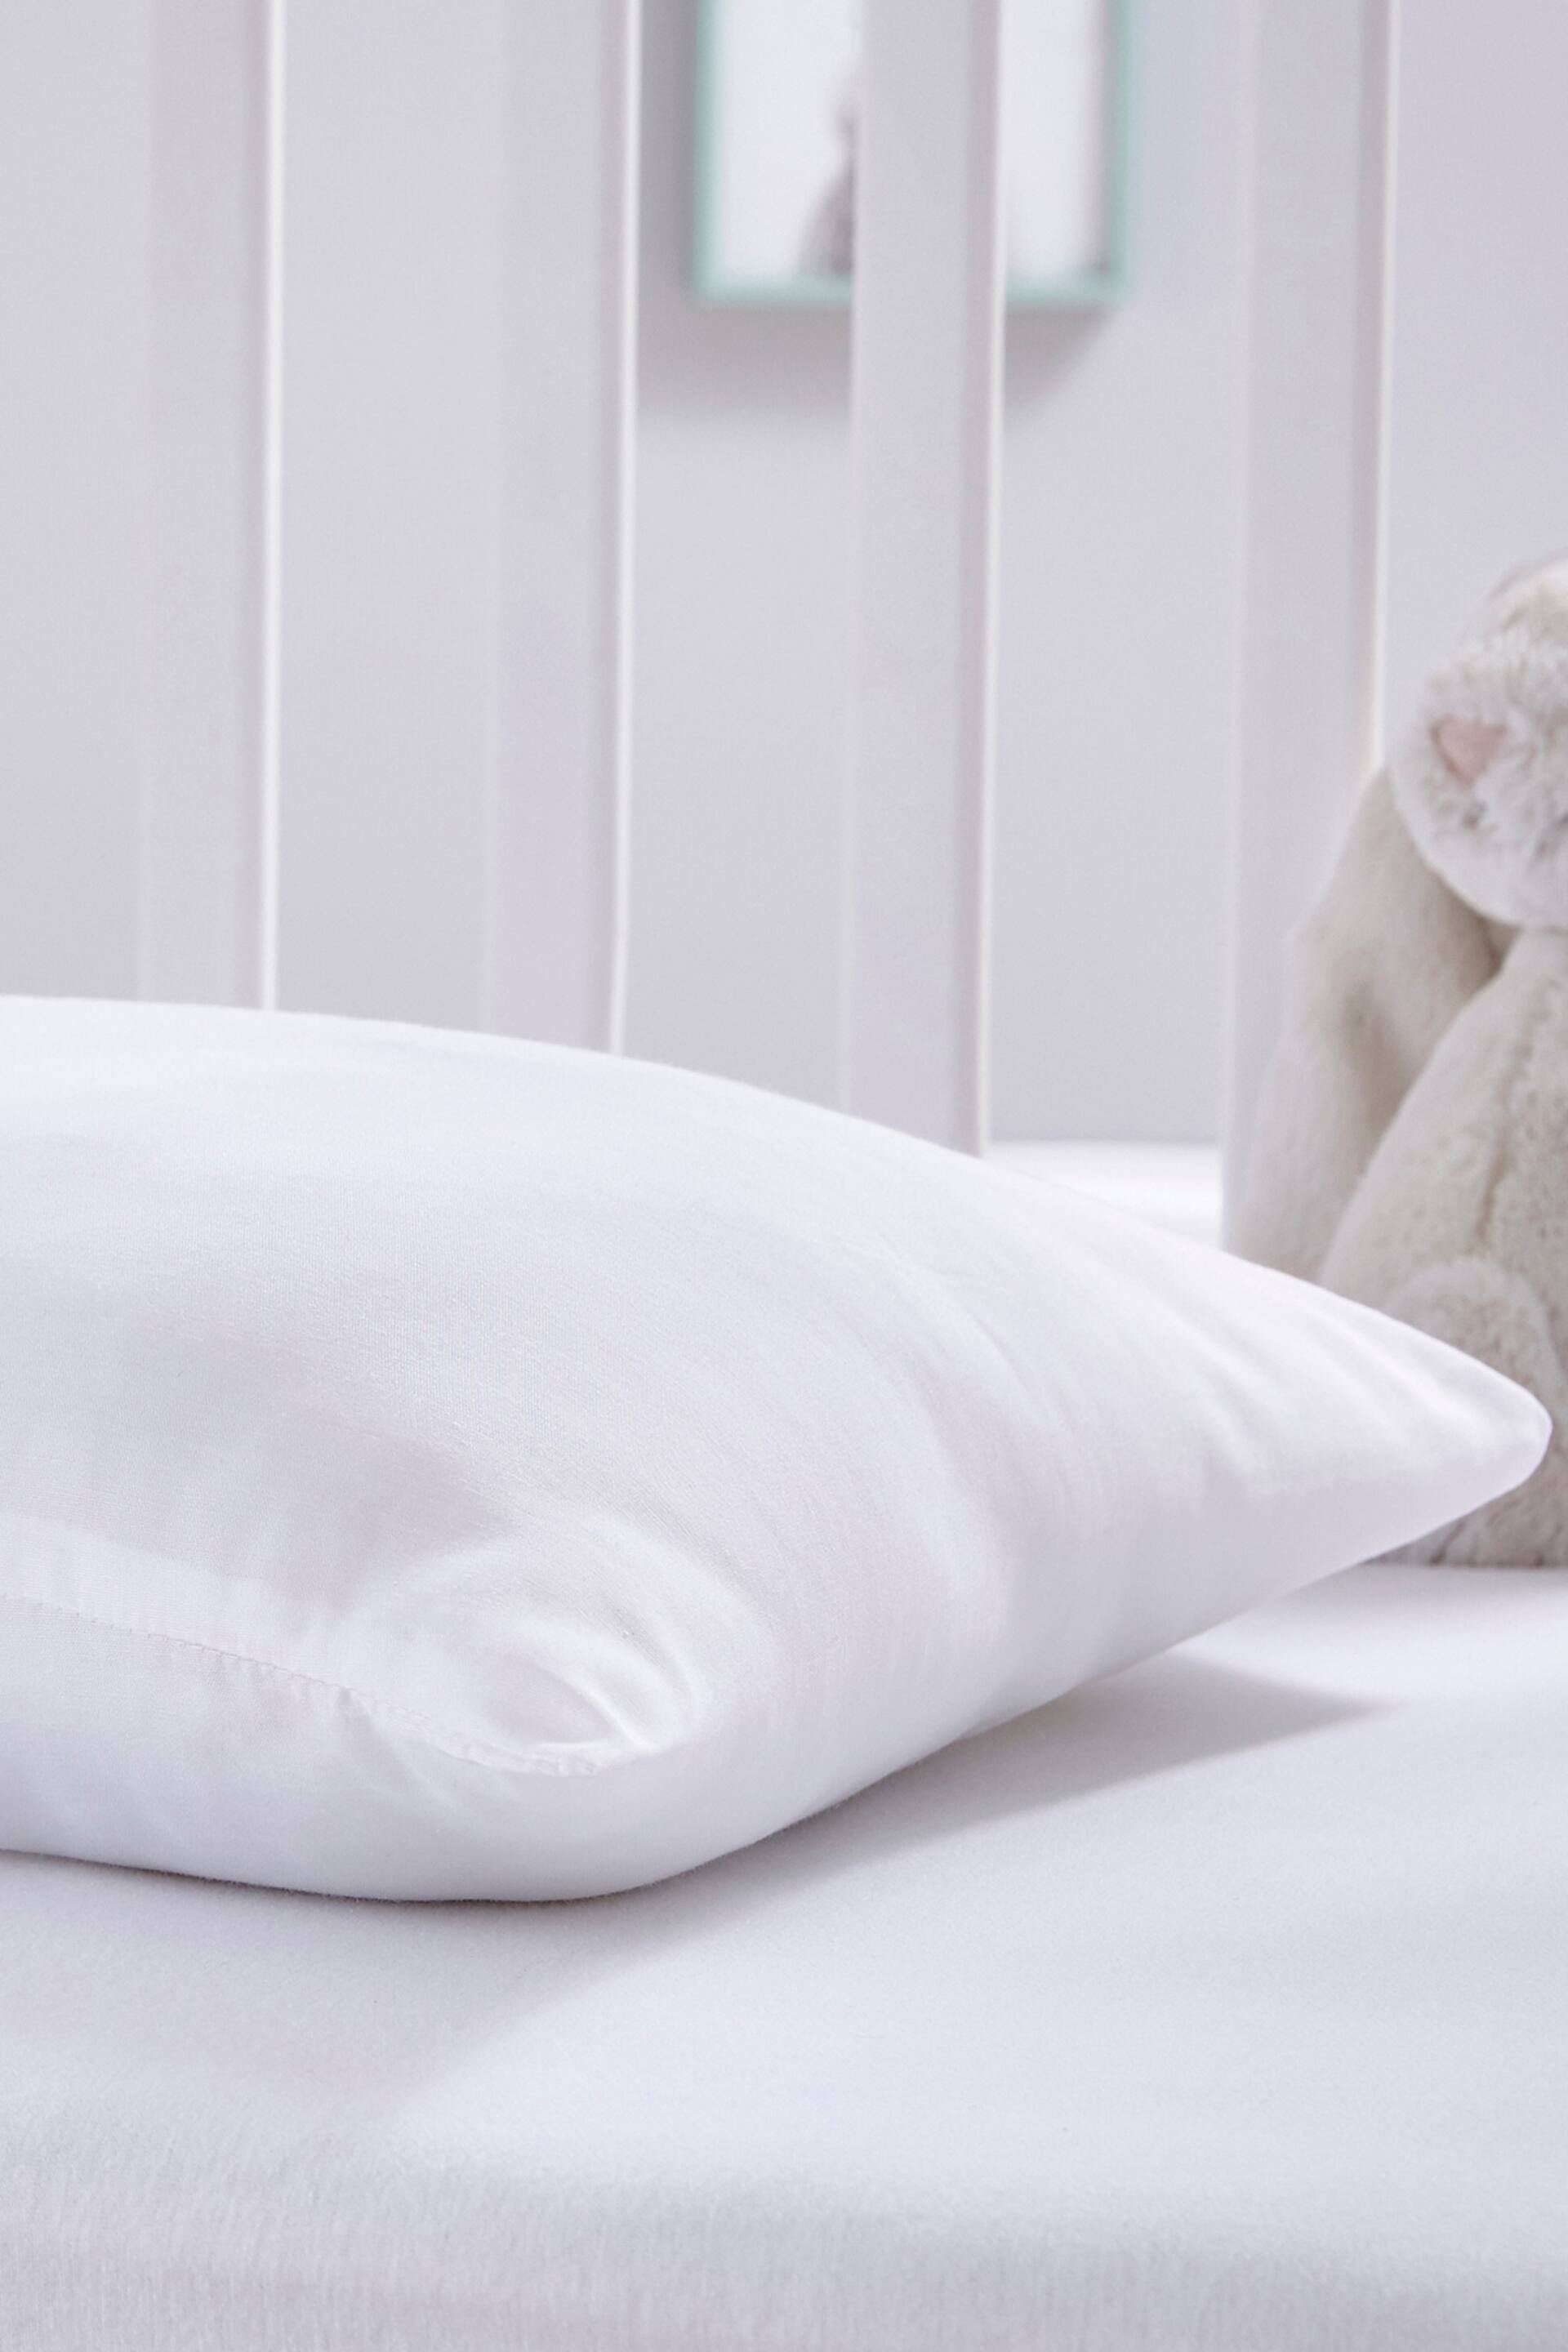 Silentnight Safe Nights Anti-Allergy Cot Bed Pillow - Image 1 of 11